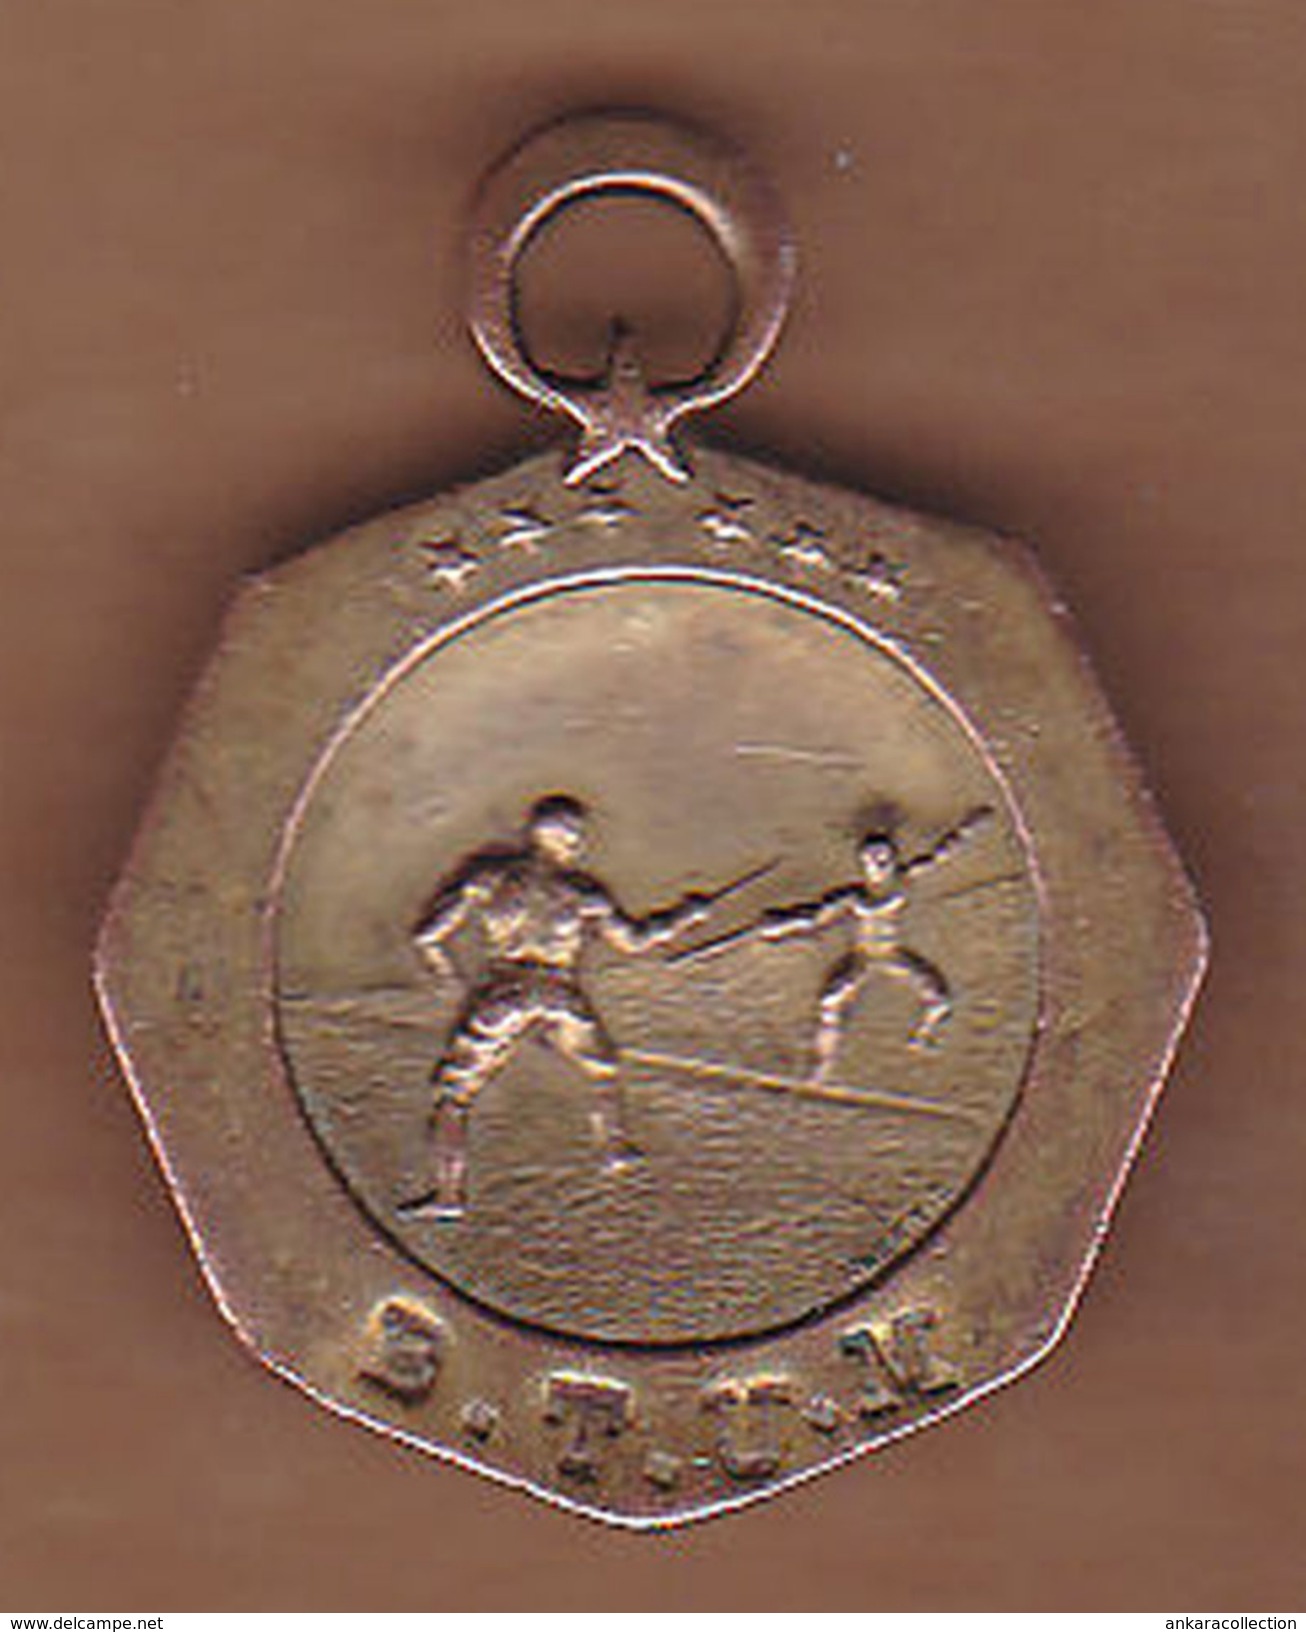 AC - FENCING MEDAL  1930s GENERAL DIRECTORATE OF YOUTH AND SPORTS TURKEY - Fencing